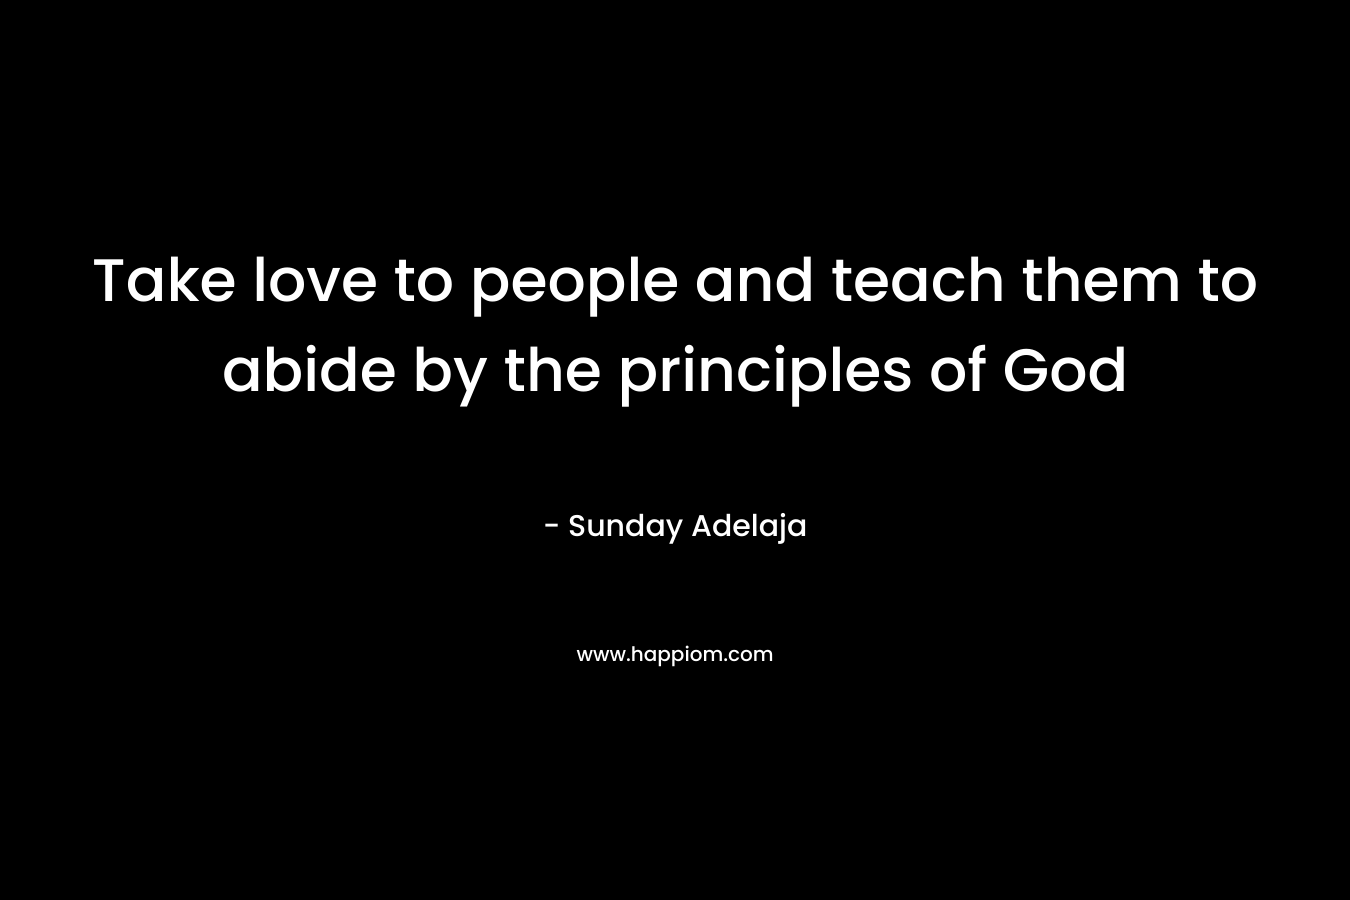 Take love to people and teach them to abide by the principles of God